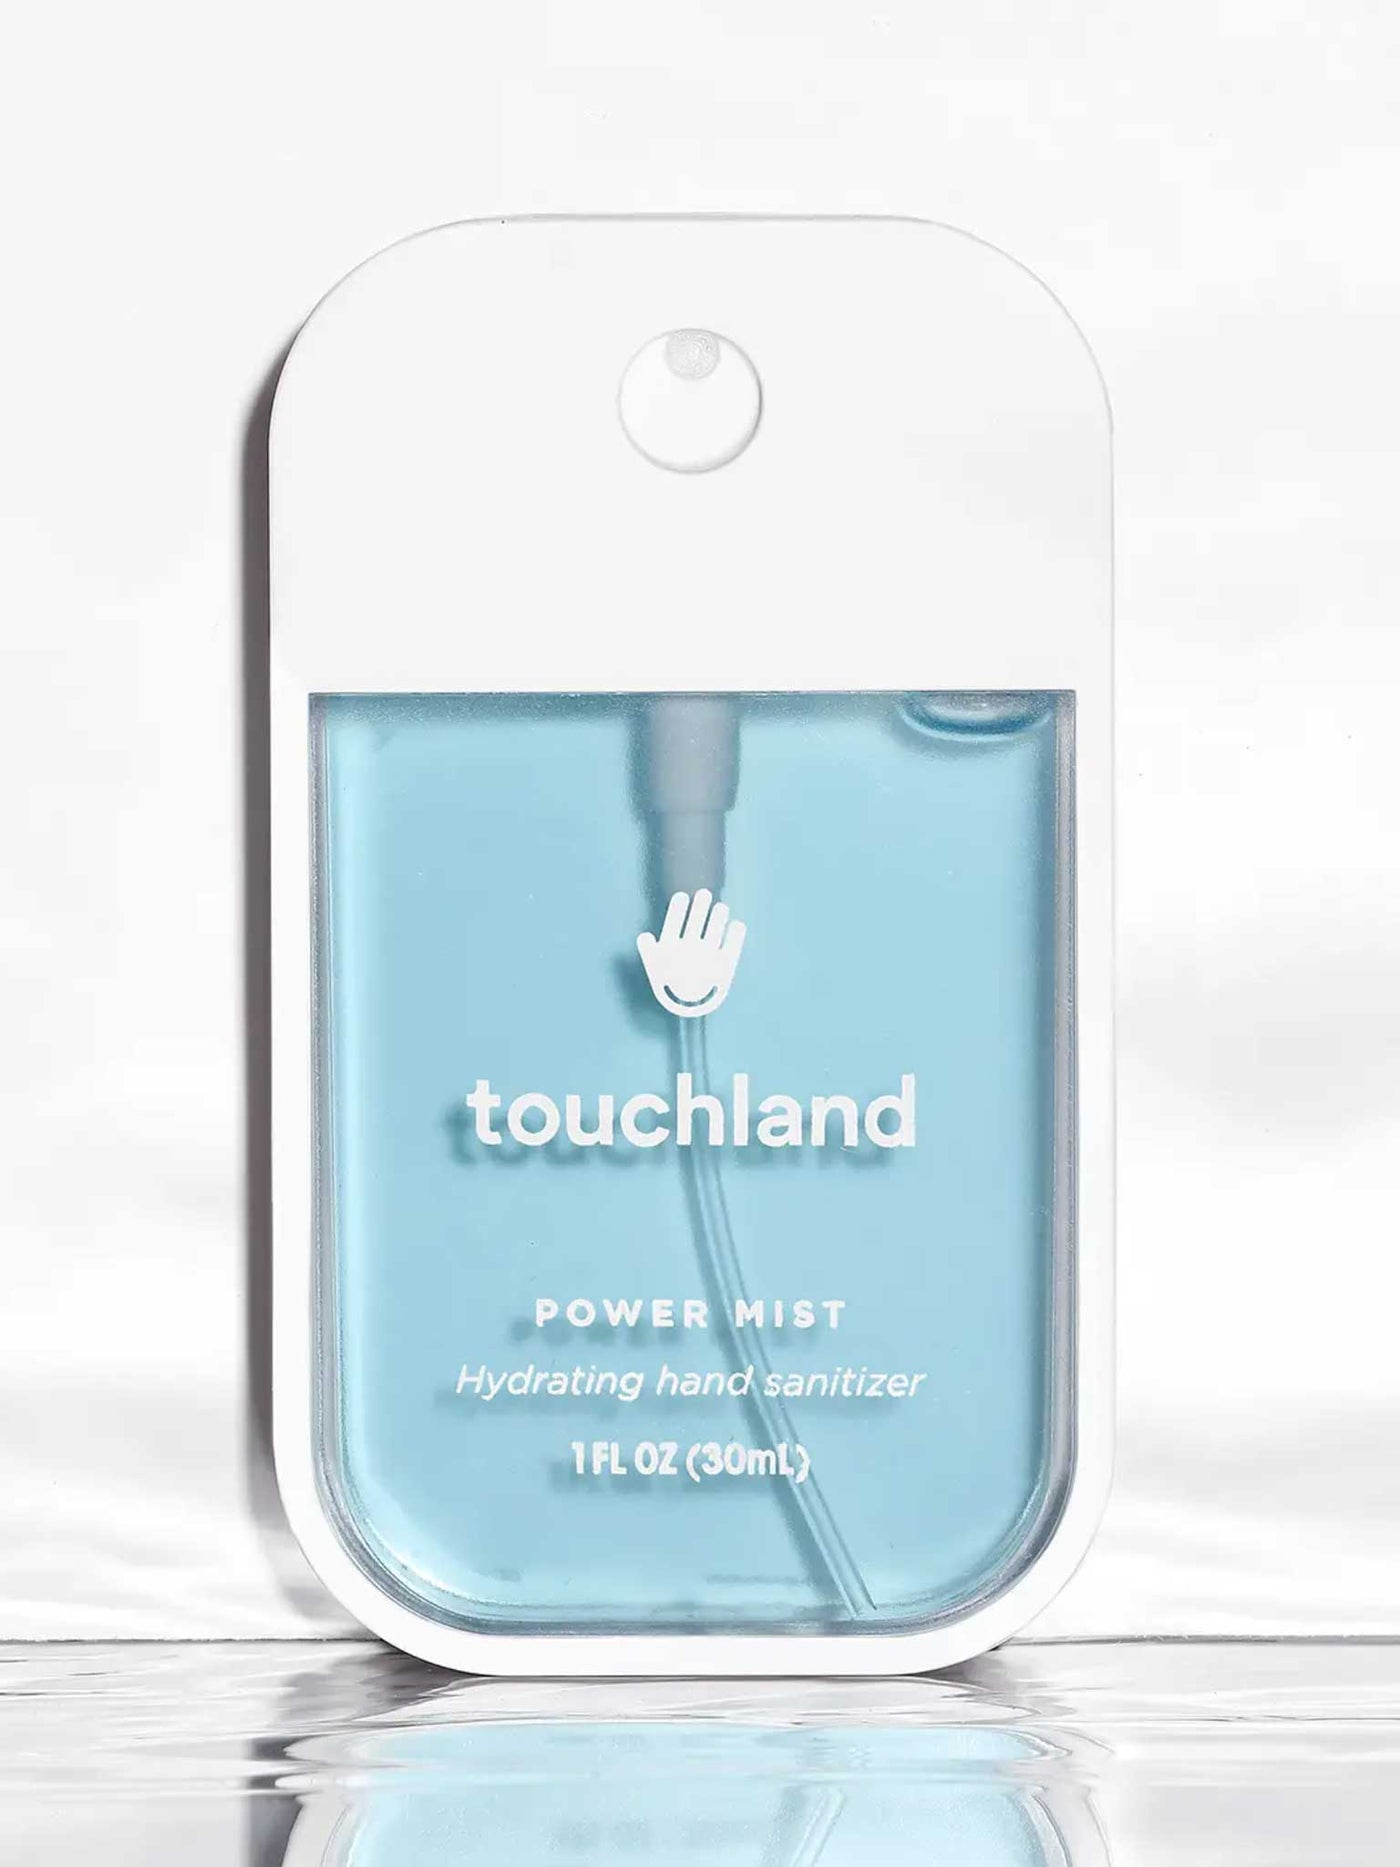 Touchland Power Mist Frosted Mint Hydrating Hand Sanitizer